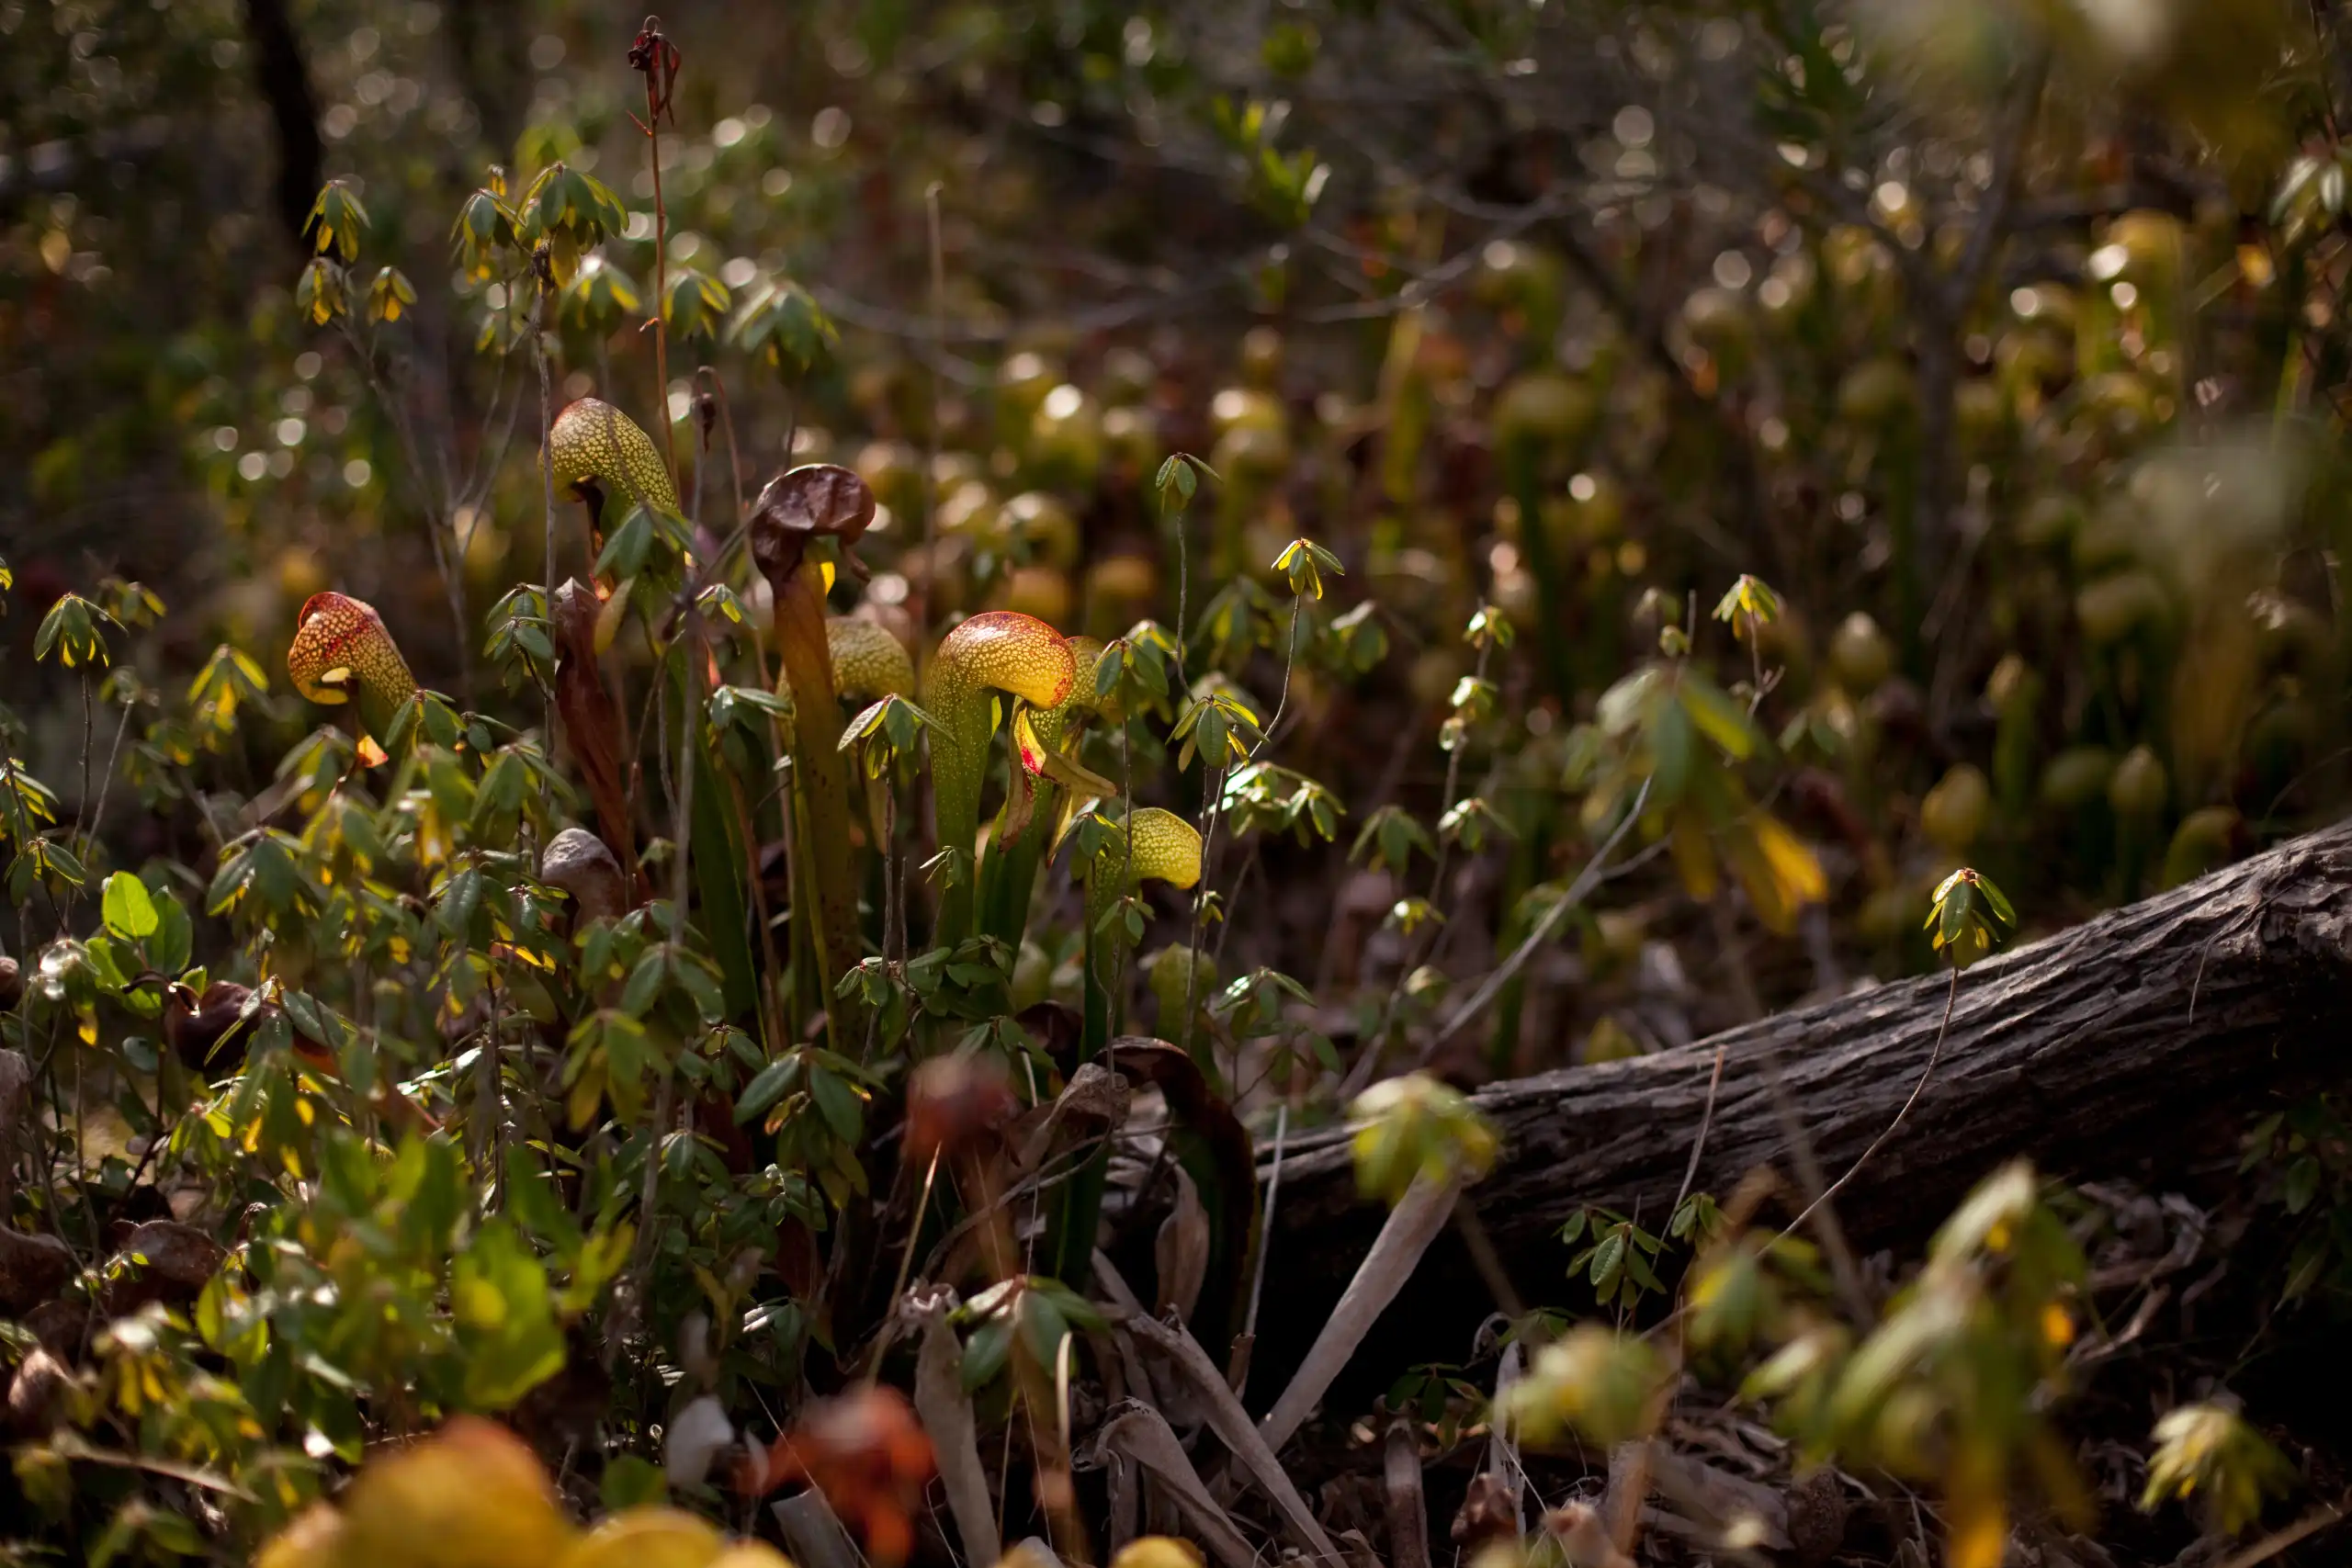 Introduced Darlingtonia california plants growing on the side of a log in the Albion pygmy forest.